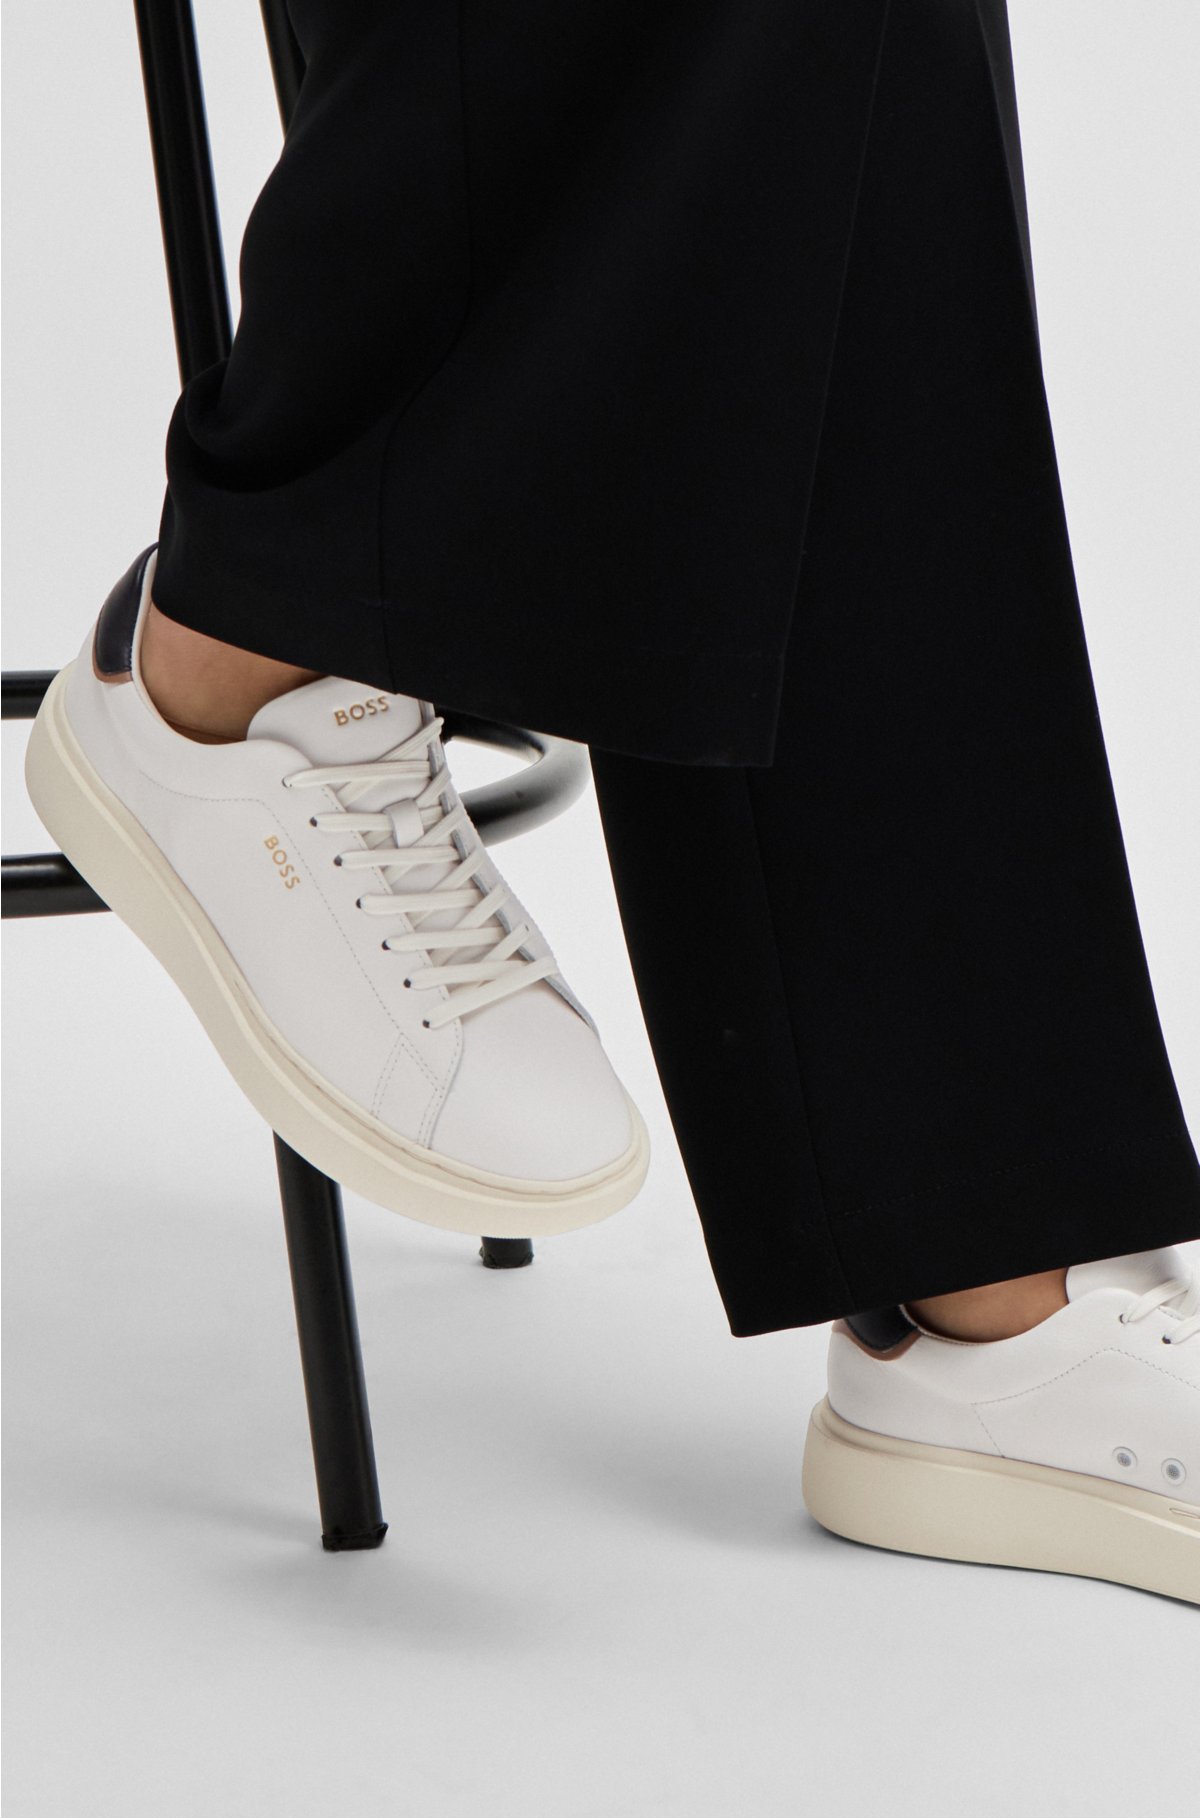 Lace-up trainers in leather with logo details, White